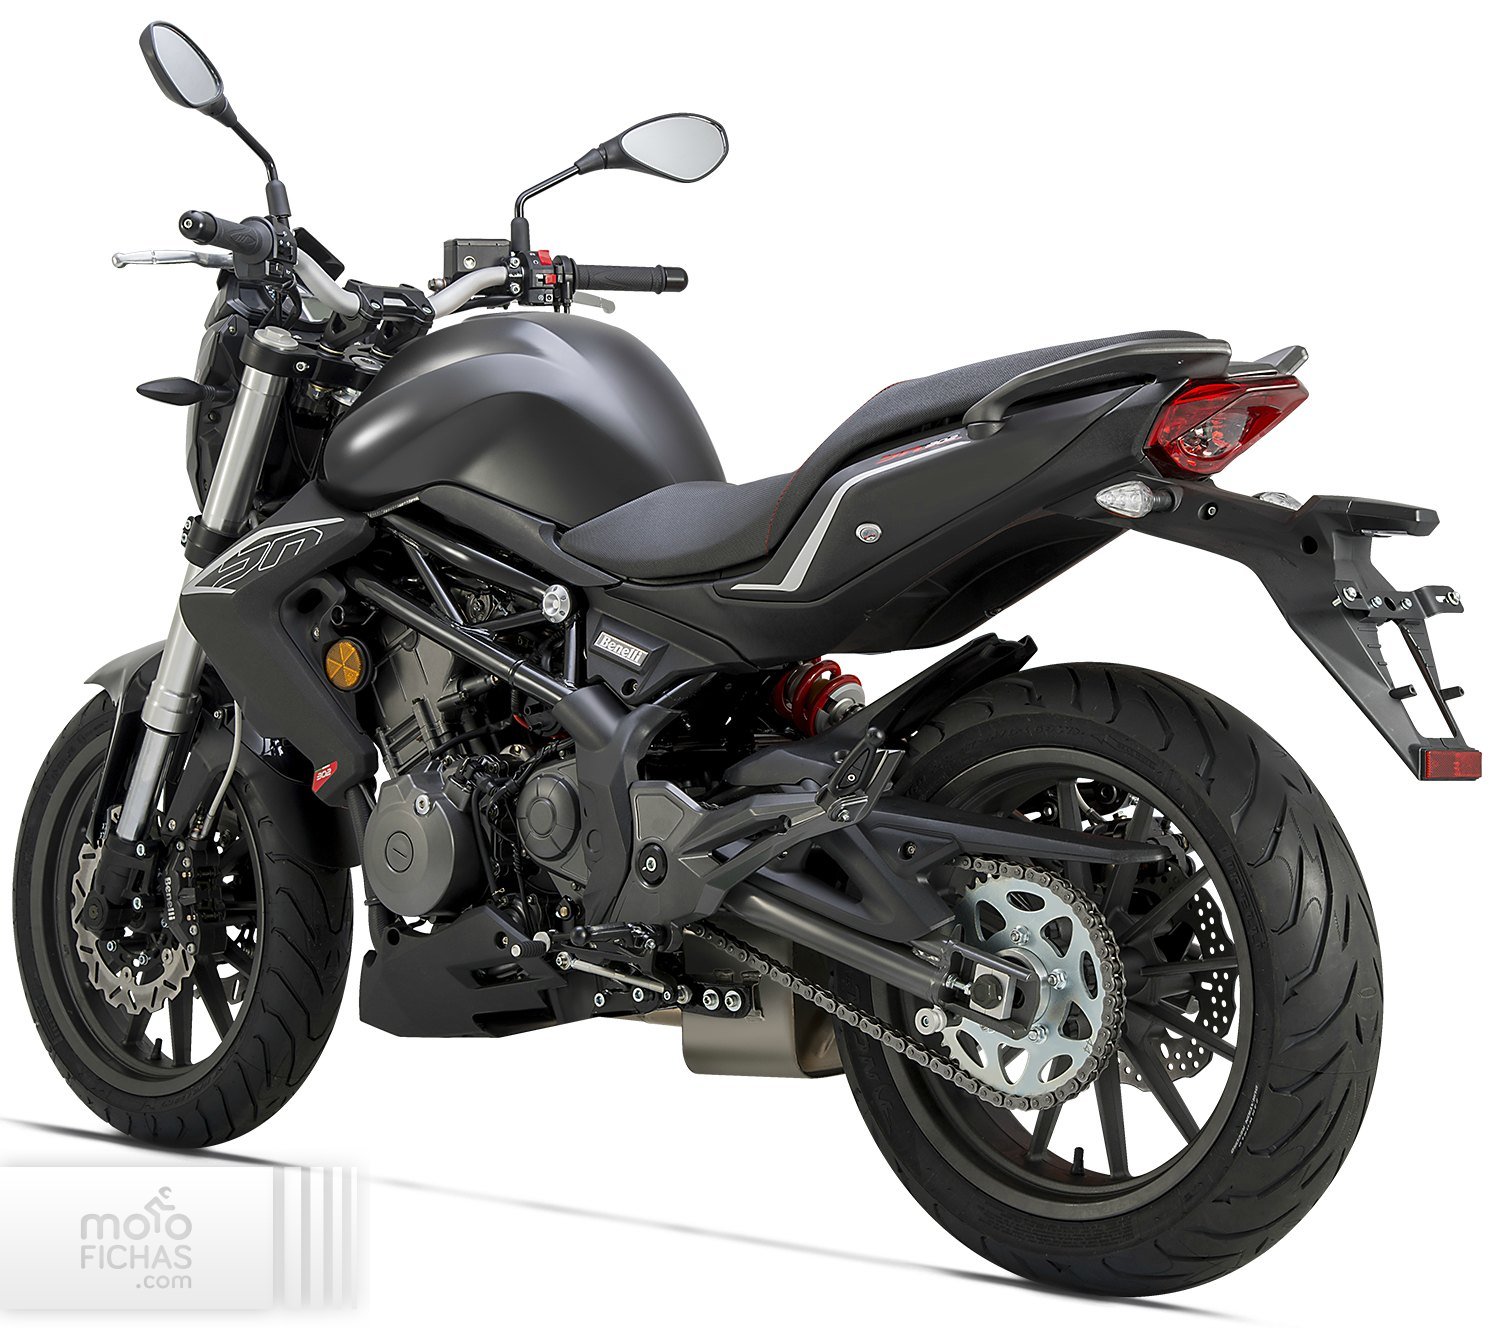 2015 Benelli BN 302 Motorcycle Ready To Launch In India 